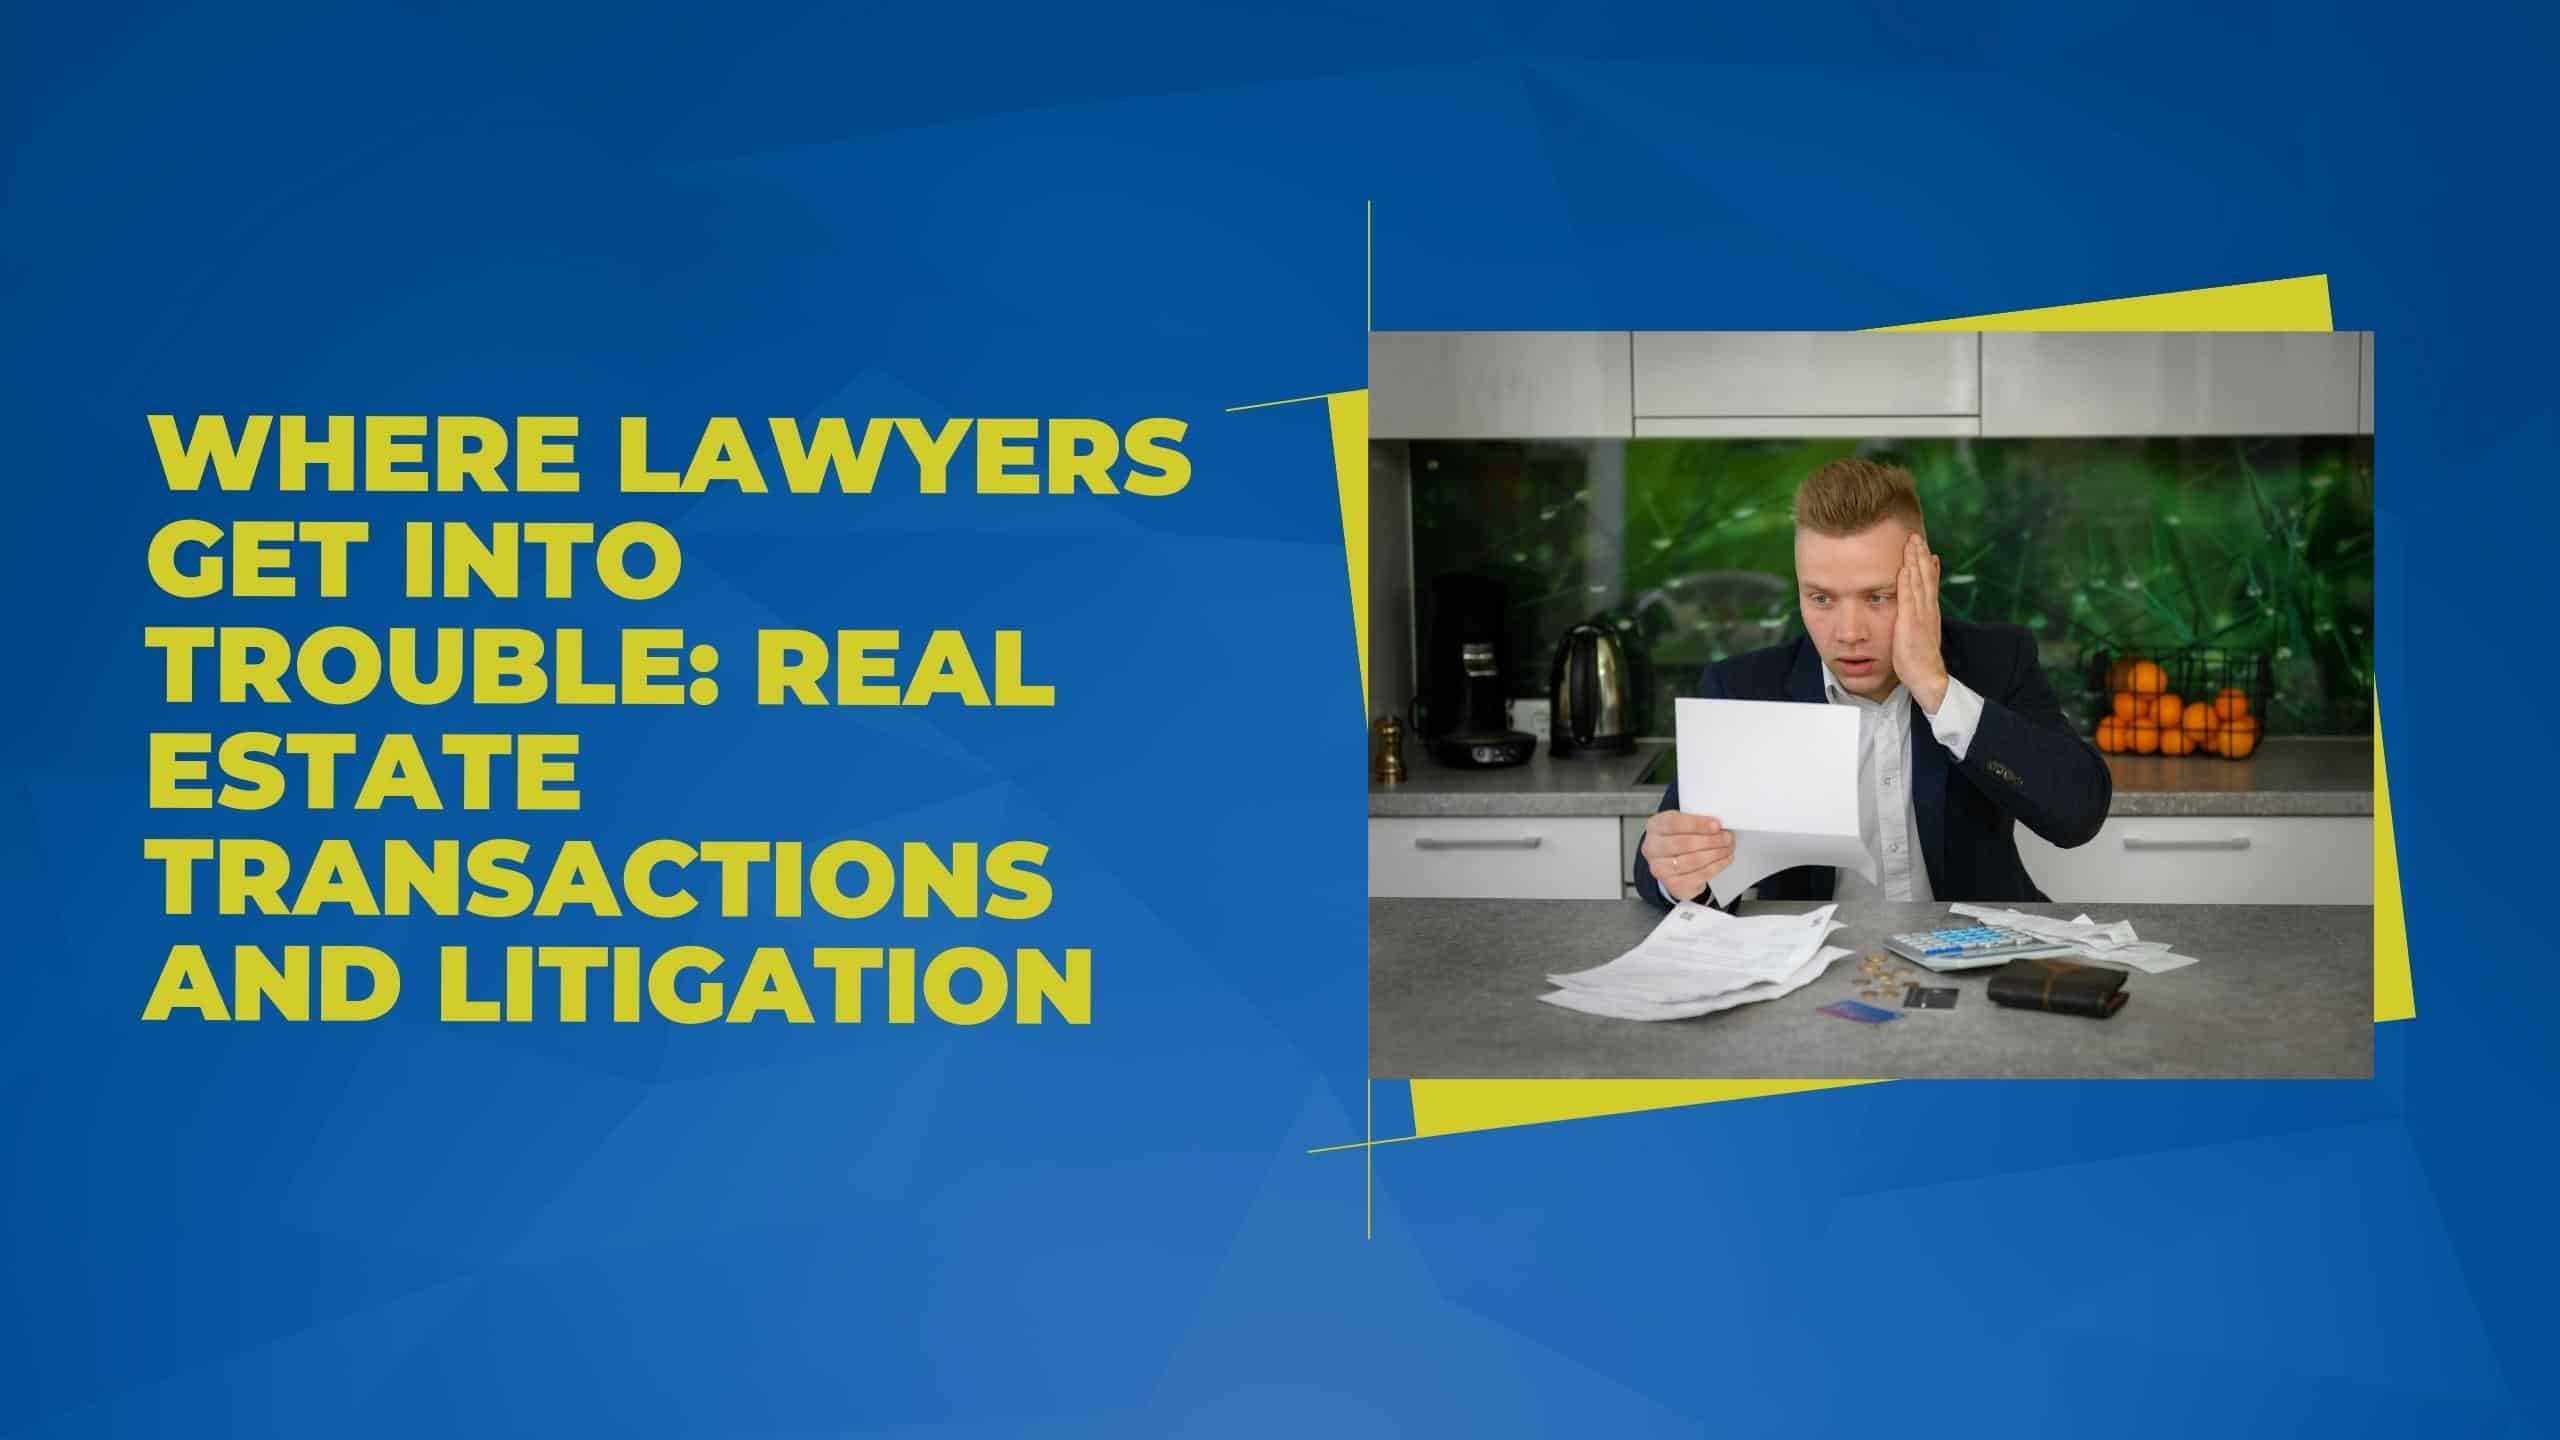 Where Lawyers Get Into Trouble: Real Estate Transactions and Litigation